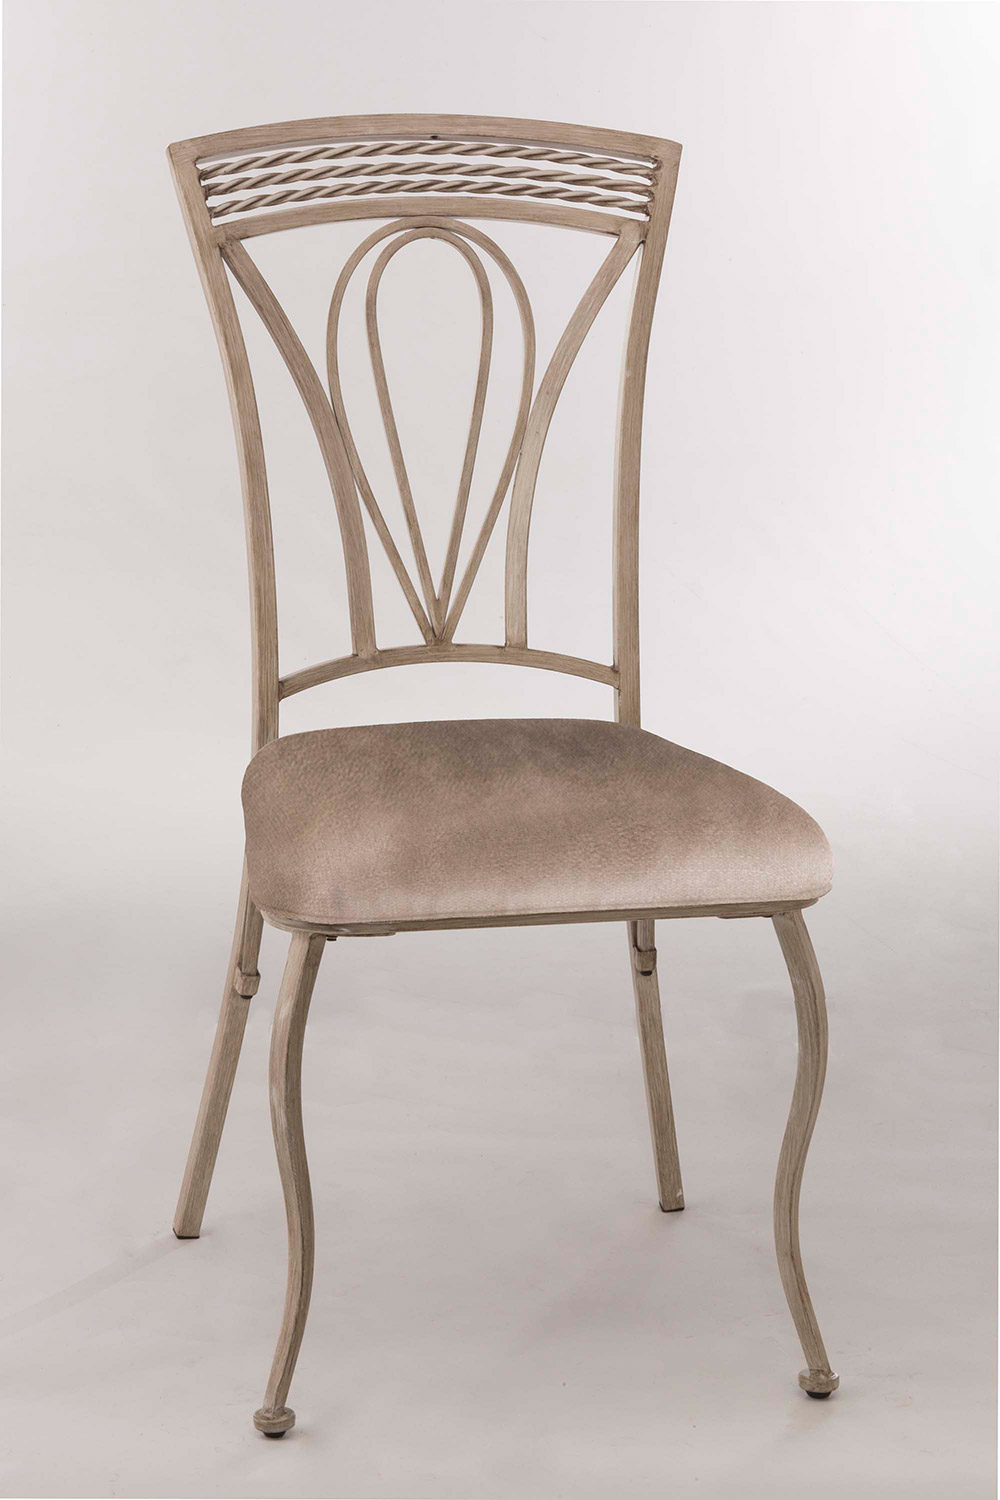 Hillsdale Napier Dining Chair - Aged Gray